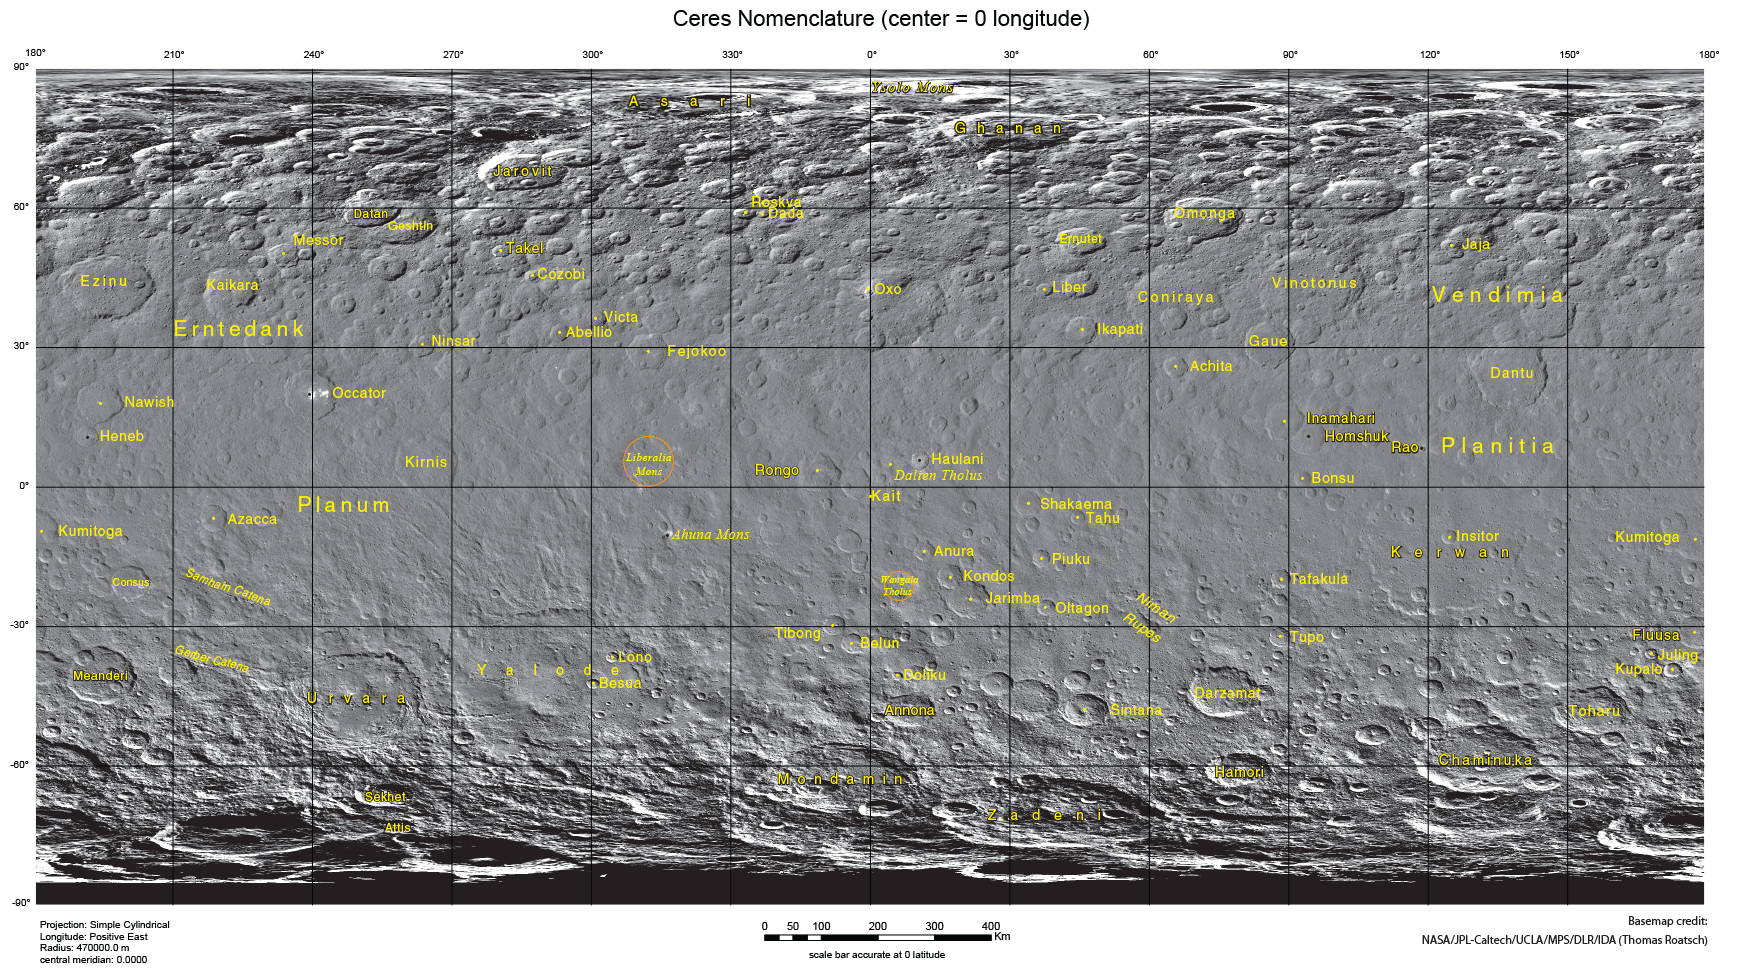 Ceres mapping